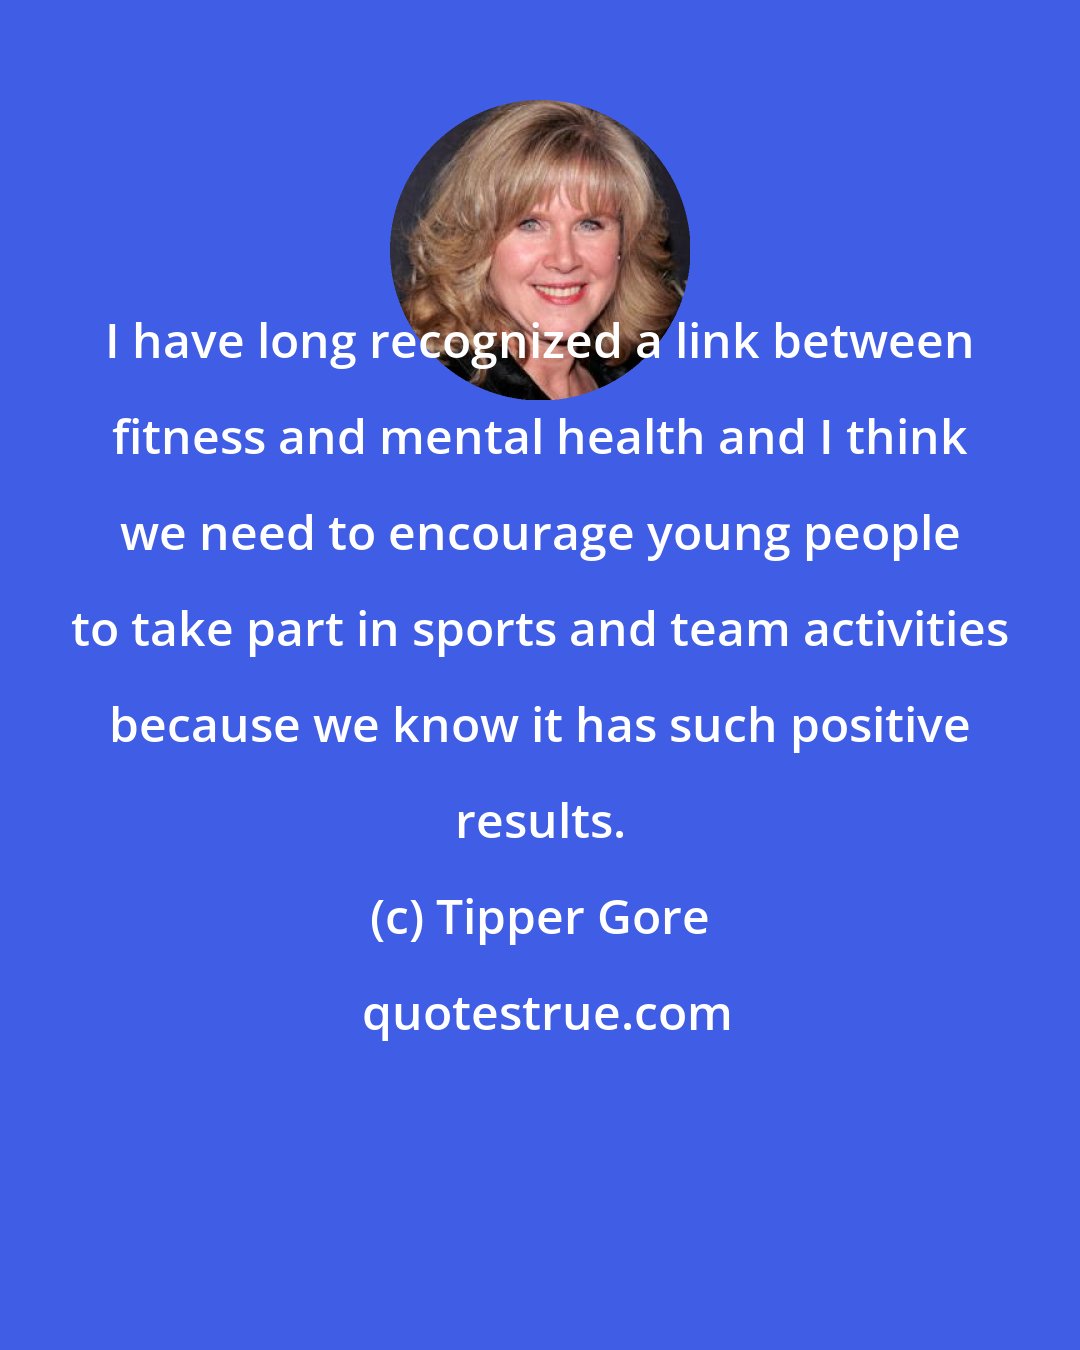 Tipper Gore: I have long recognized a link between fitness and mental health and I think we need to encourage young people to take part in sports and team activities because we know it has such positive results.